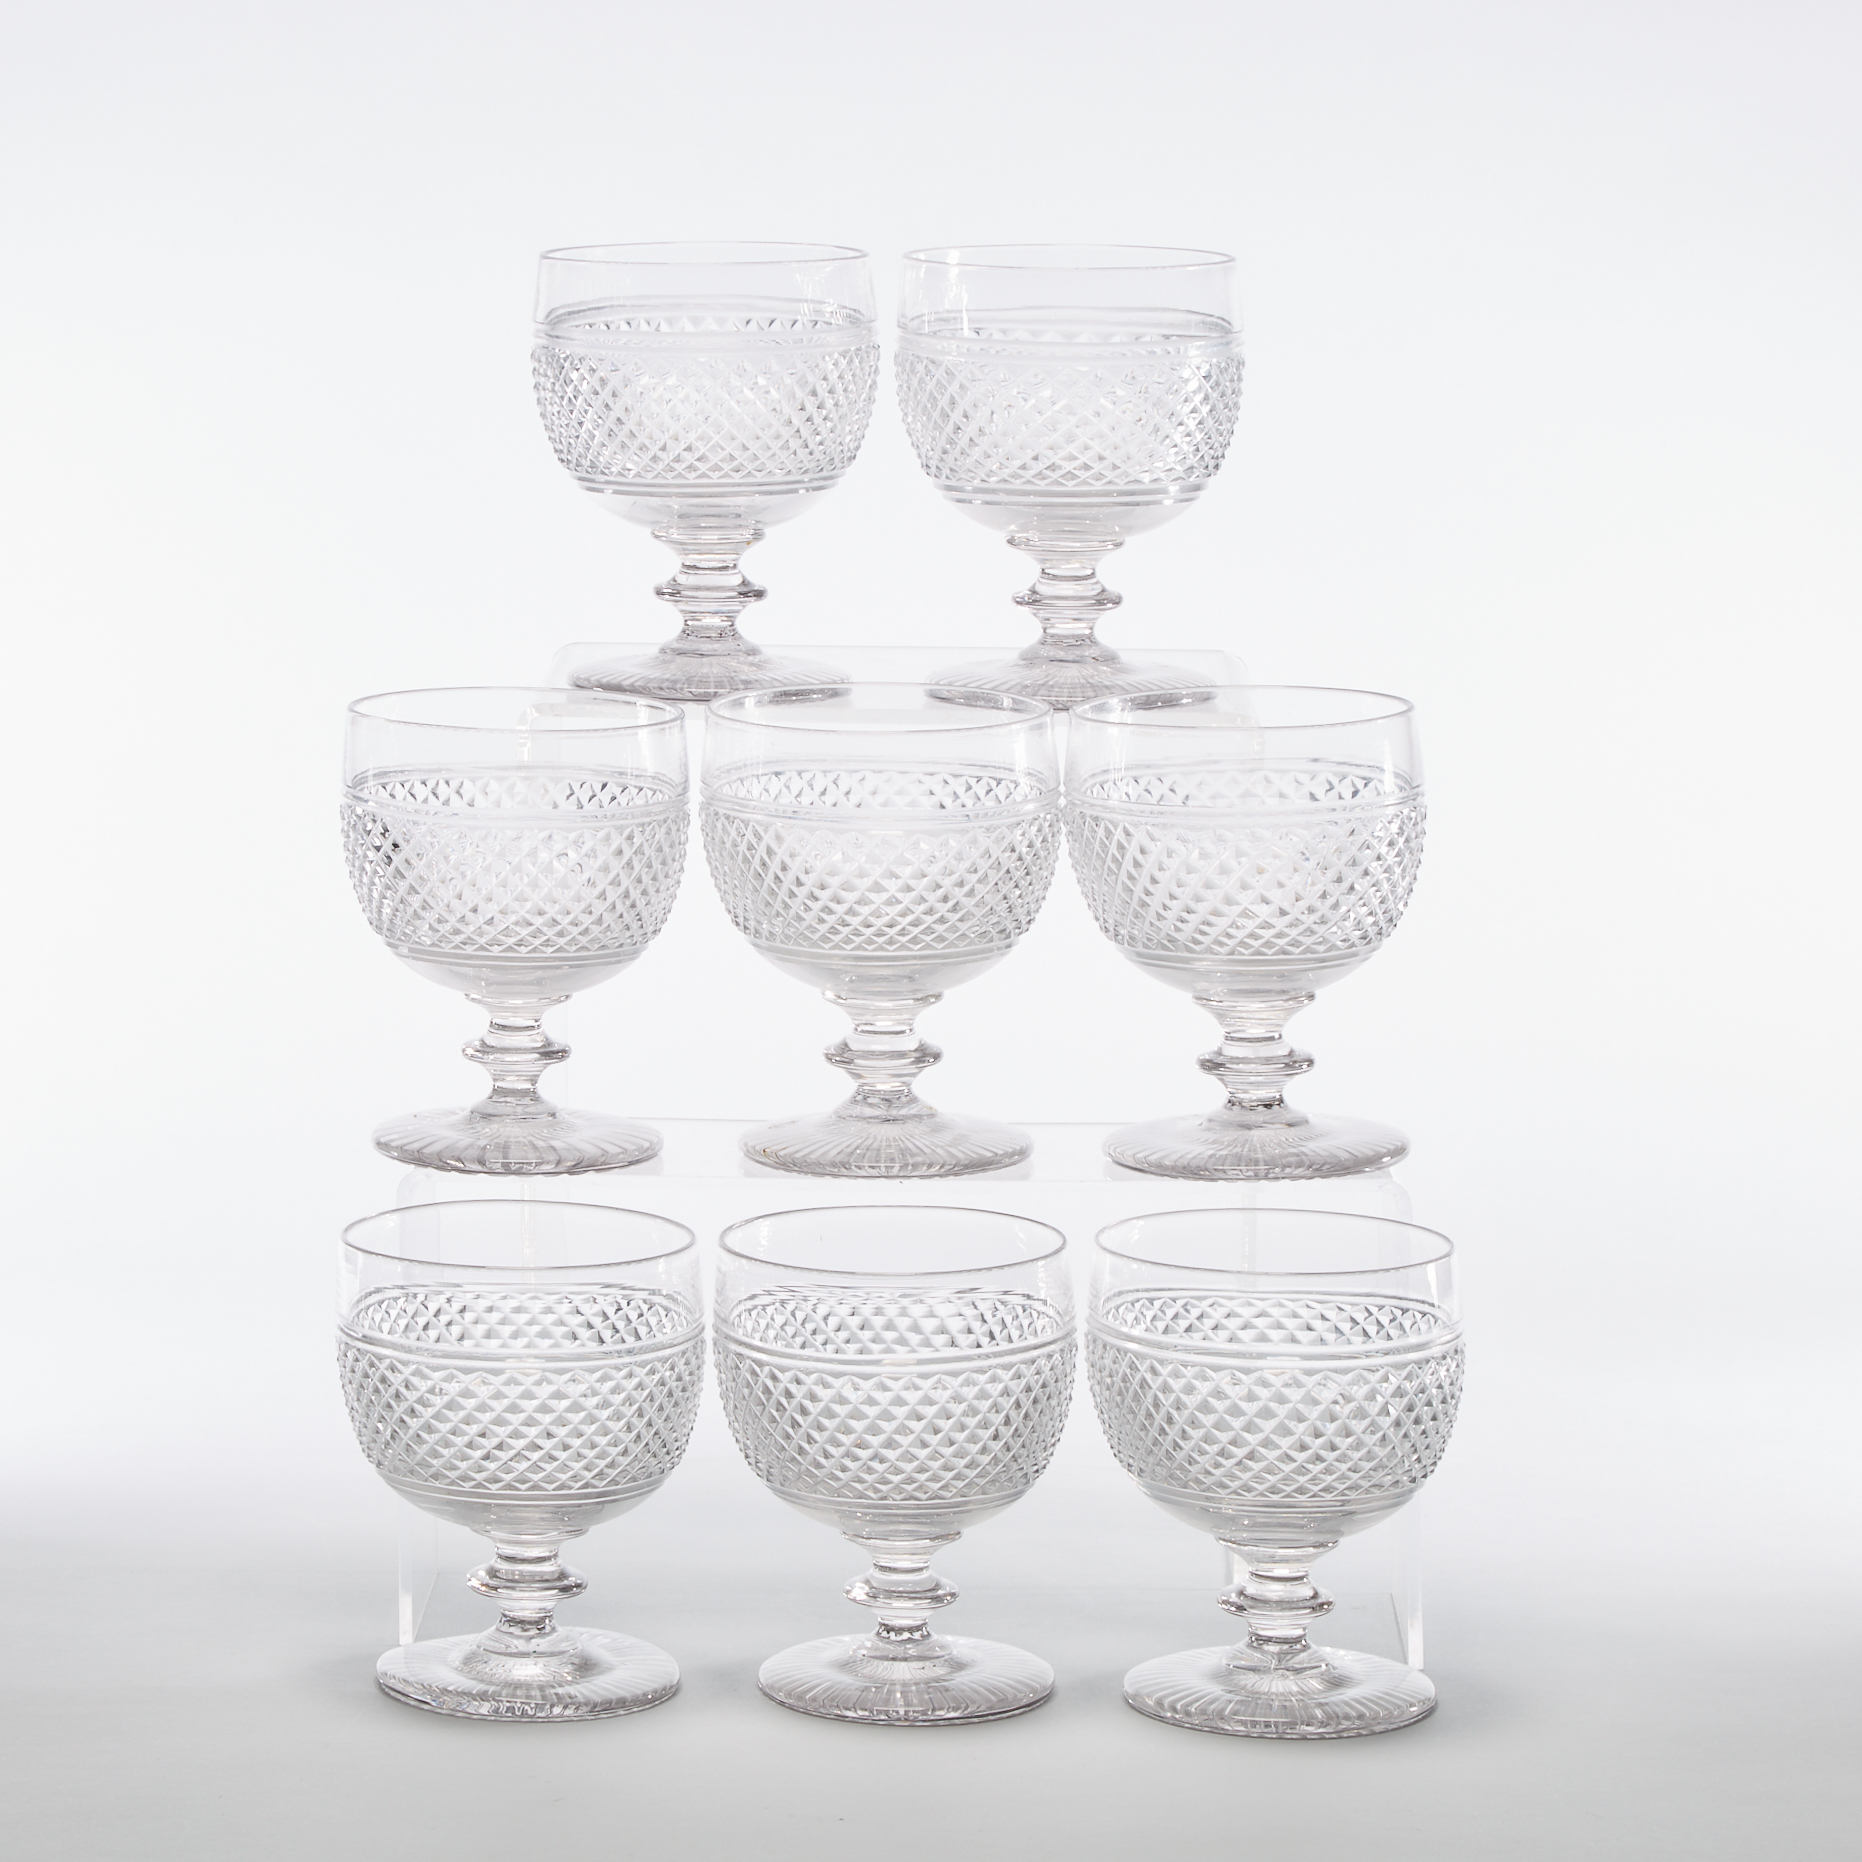 Eight Anglo-Irish Cut Glass Water Goblets, 19th century